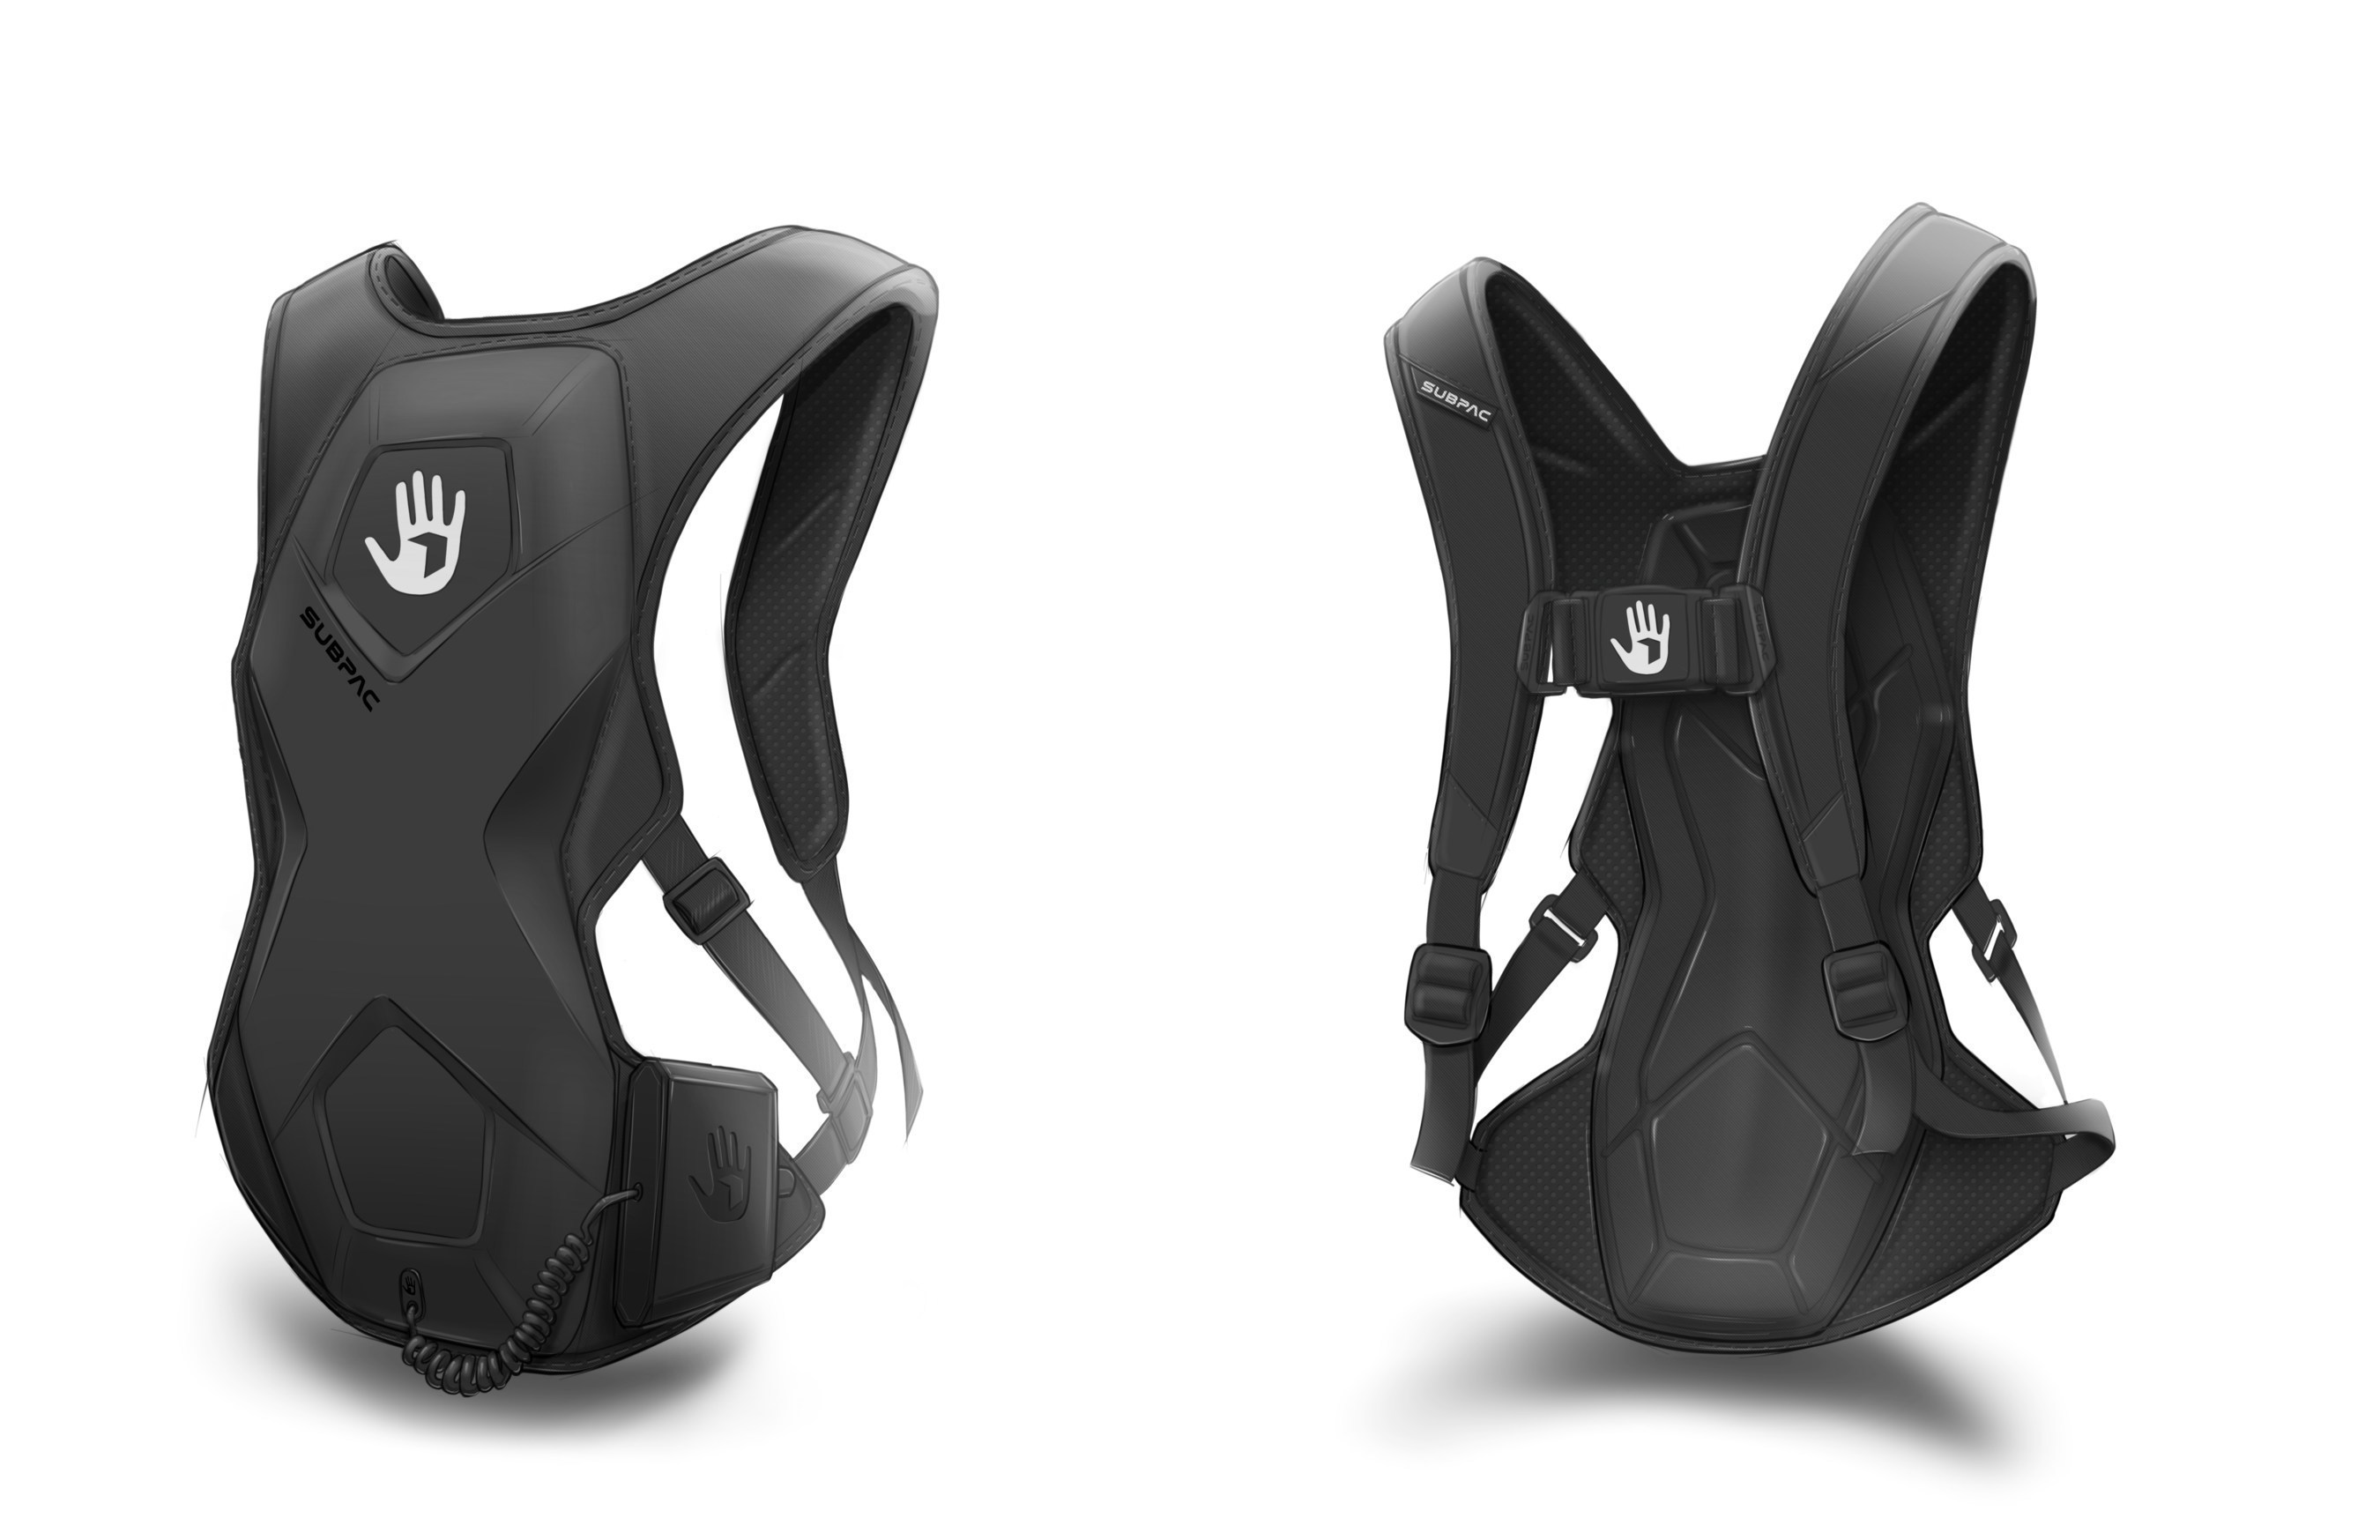 SubPac Brings A New Physical Dimension In Audio To Enhance Your Virtual  Reality & Gaming Experience